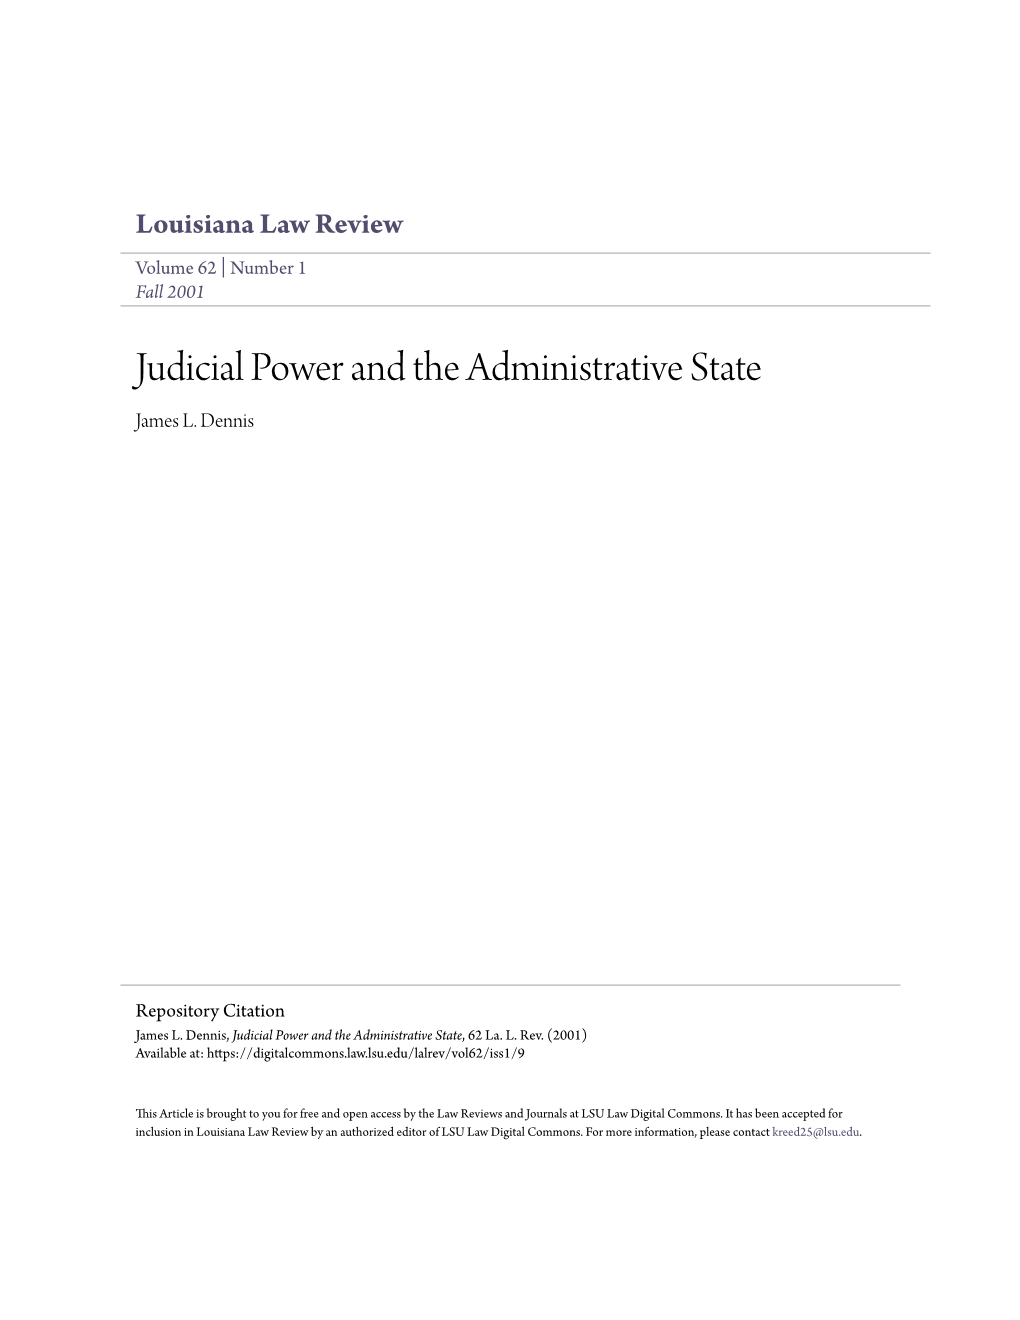 Judicial Power and the Administrative State James L